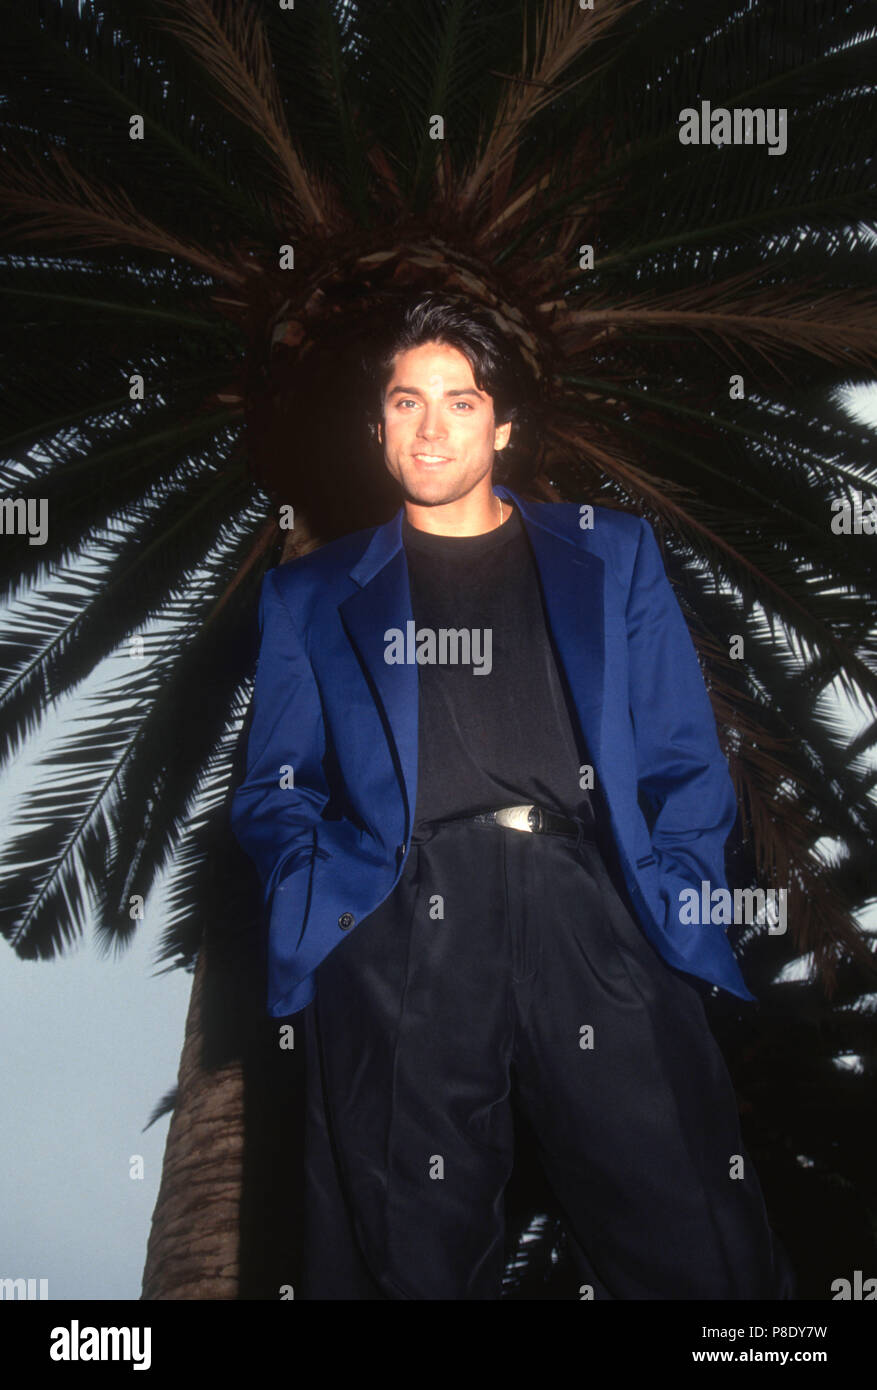 LOS ANGELES, CA - FEBRUARY 25: (EXCLUSIVE) Actor Gerard Christopher poses during a photo shoot on February 25, 1992 in Los Angeles, California. Photo by Barry King/Alamy Stock Photo Stock Photo